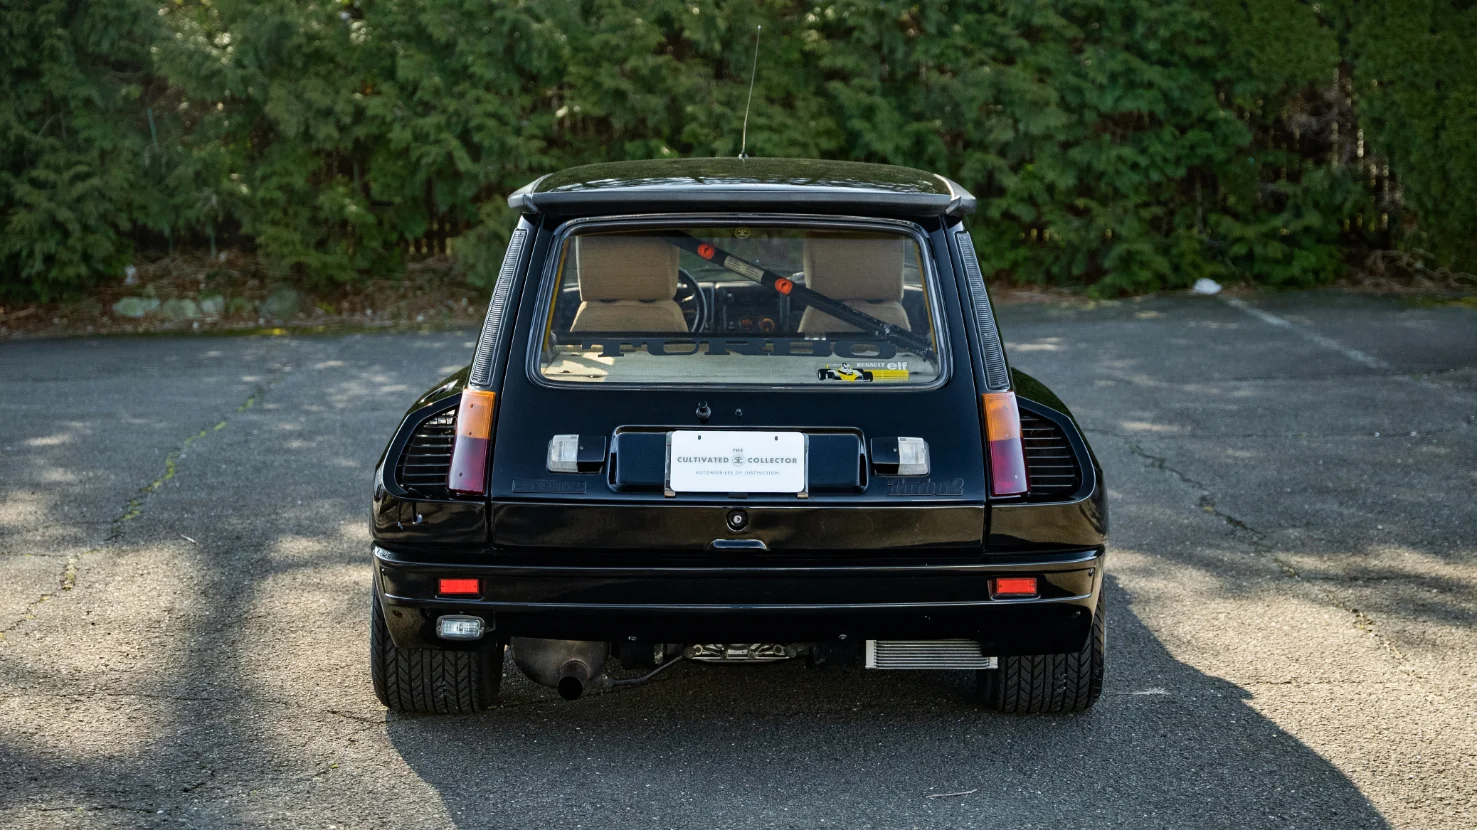 1985 Renault 5 Turbo 2 Type 8221 for Sale